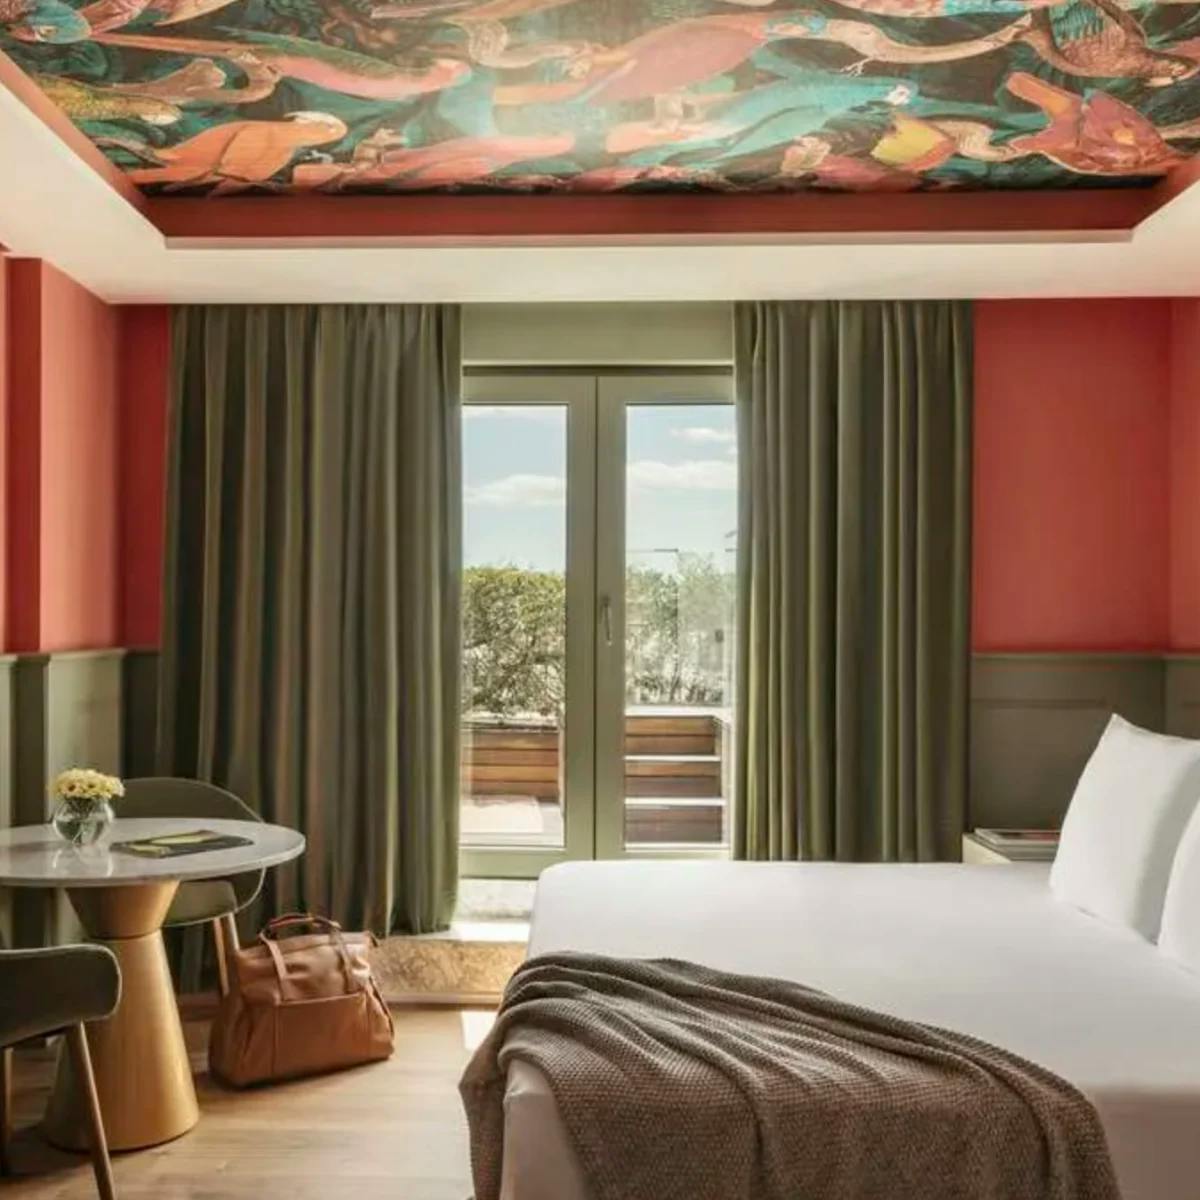 A bedroom in the Hotel Colon, a Gran Melia hotel, with red and green walls, an abstract mural on the ceiling and a view of trees from the balcony.